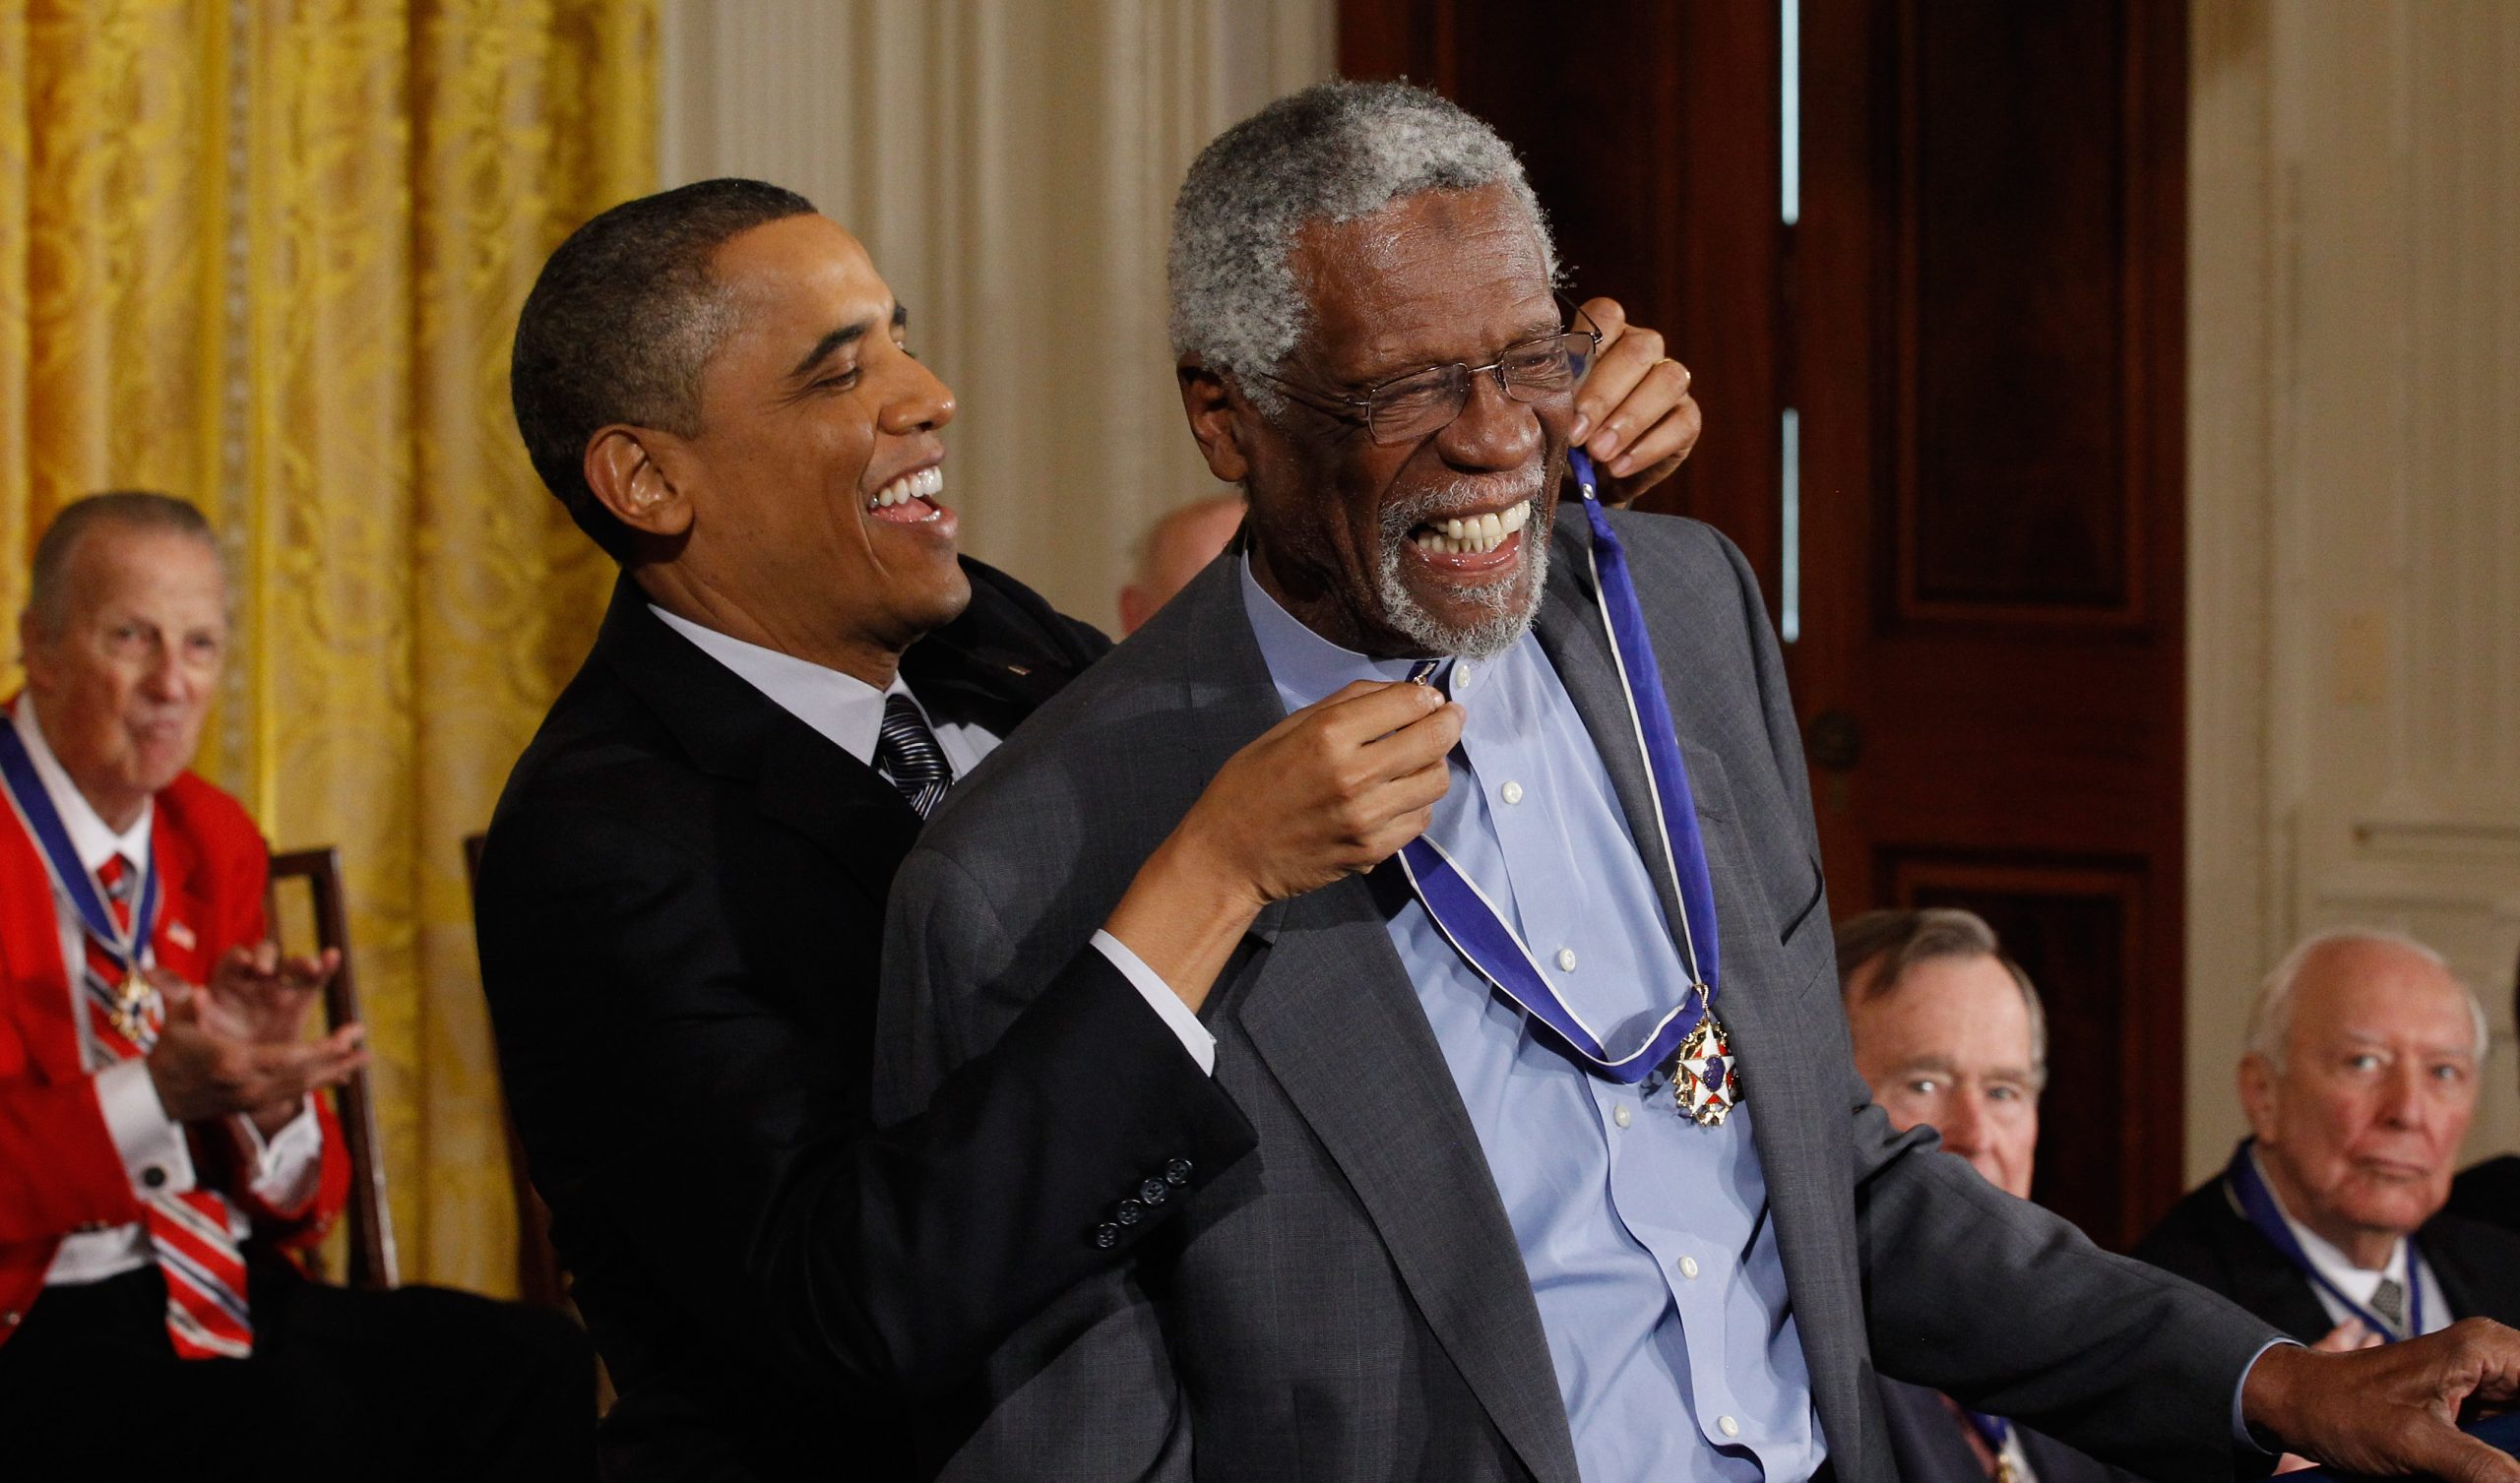 Obama on Bill Russell: ‘Today we lost a giant’